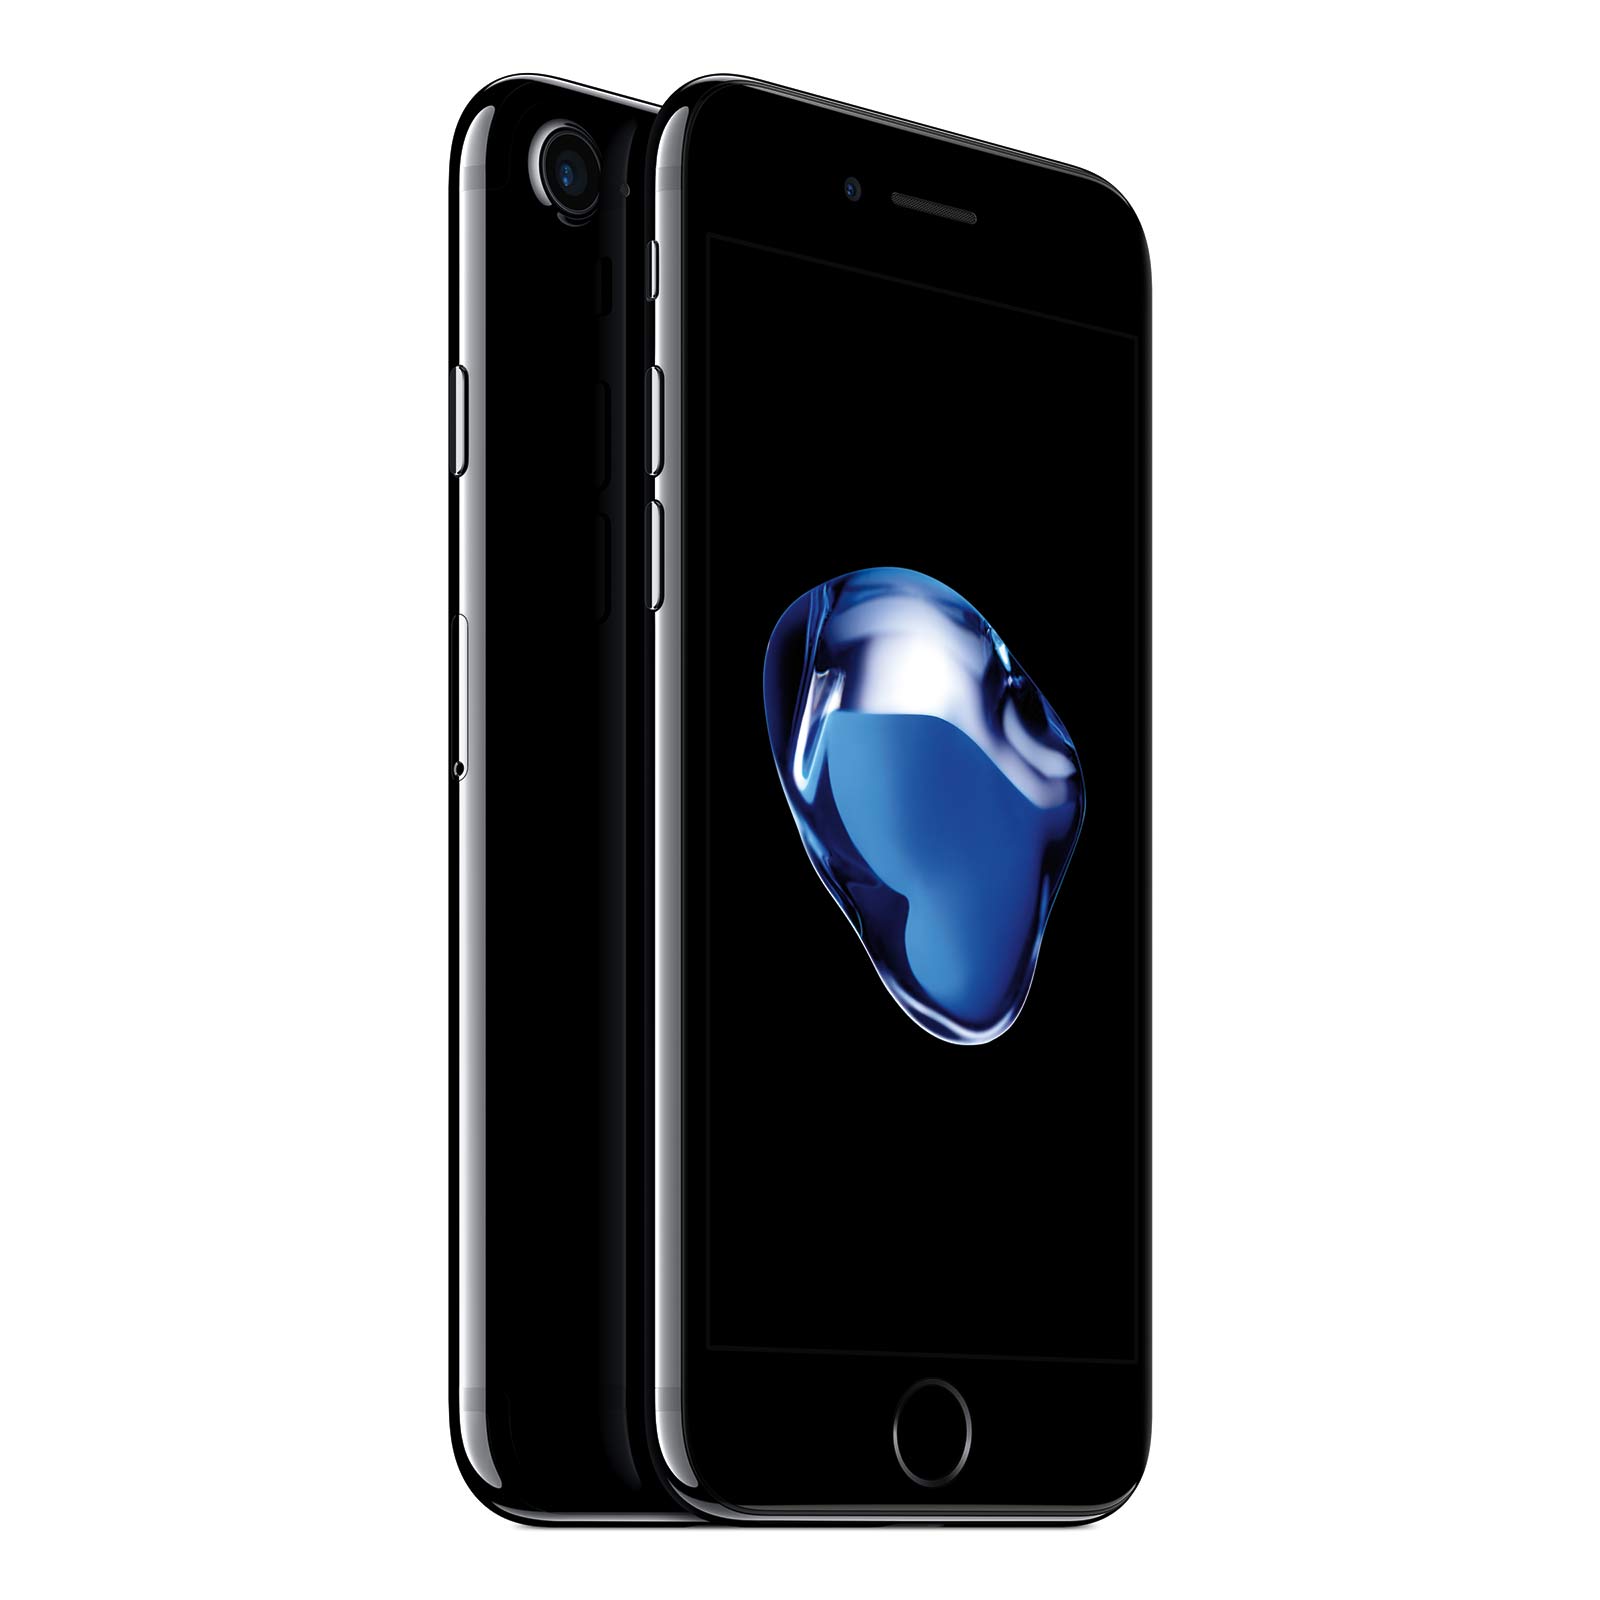 apple iphone 7 specification